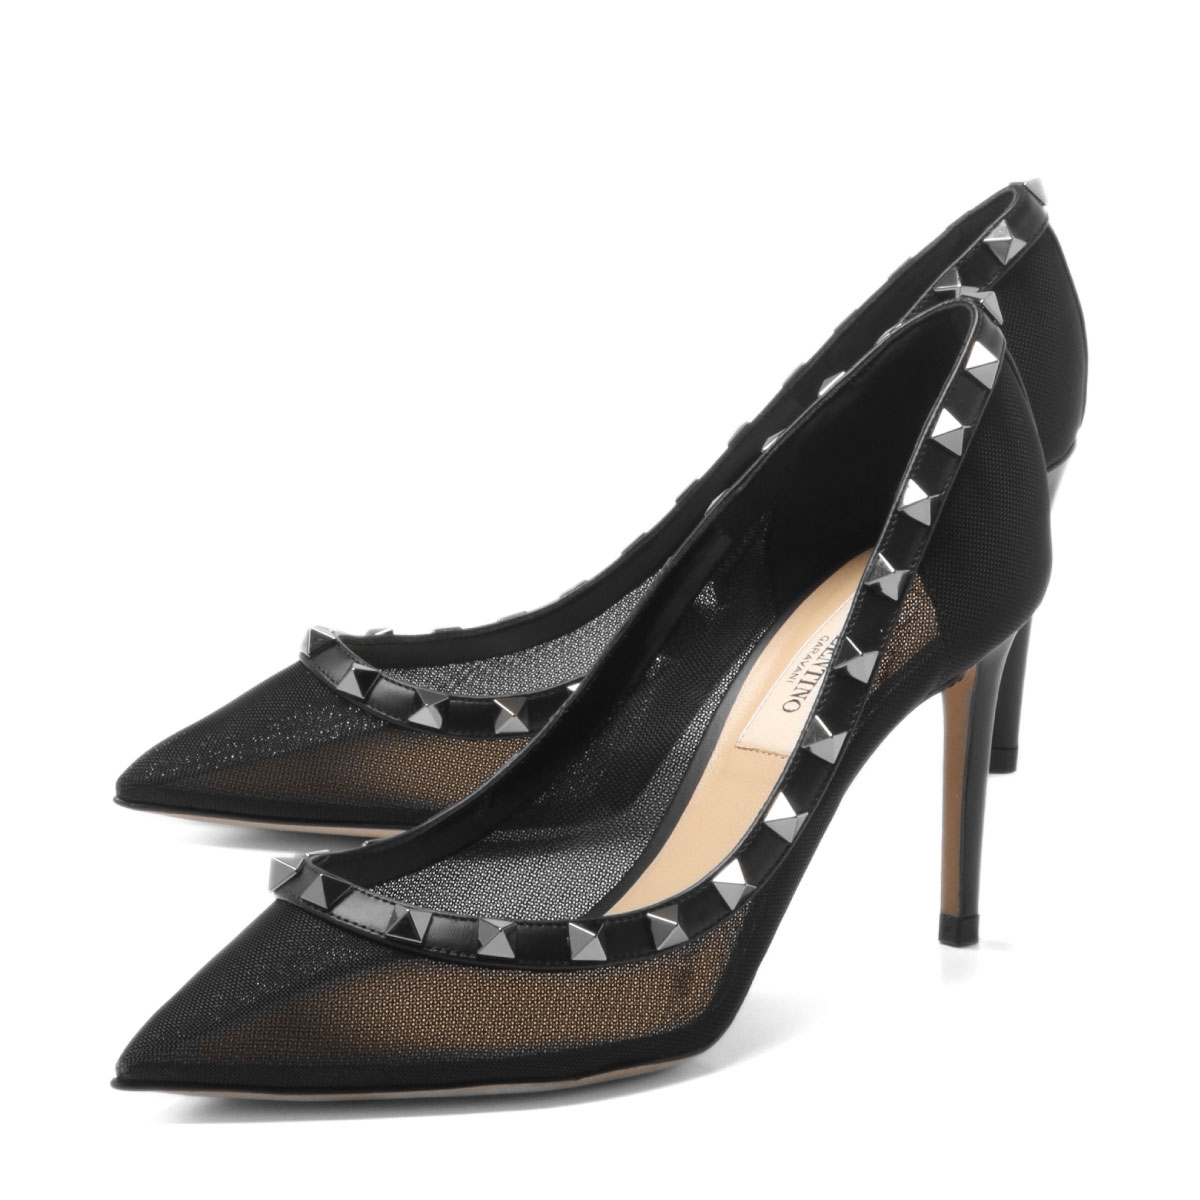 valentino pointed heels get ee145 4723a